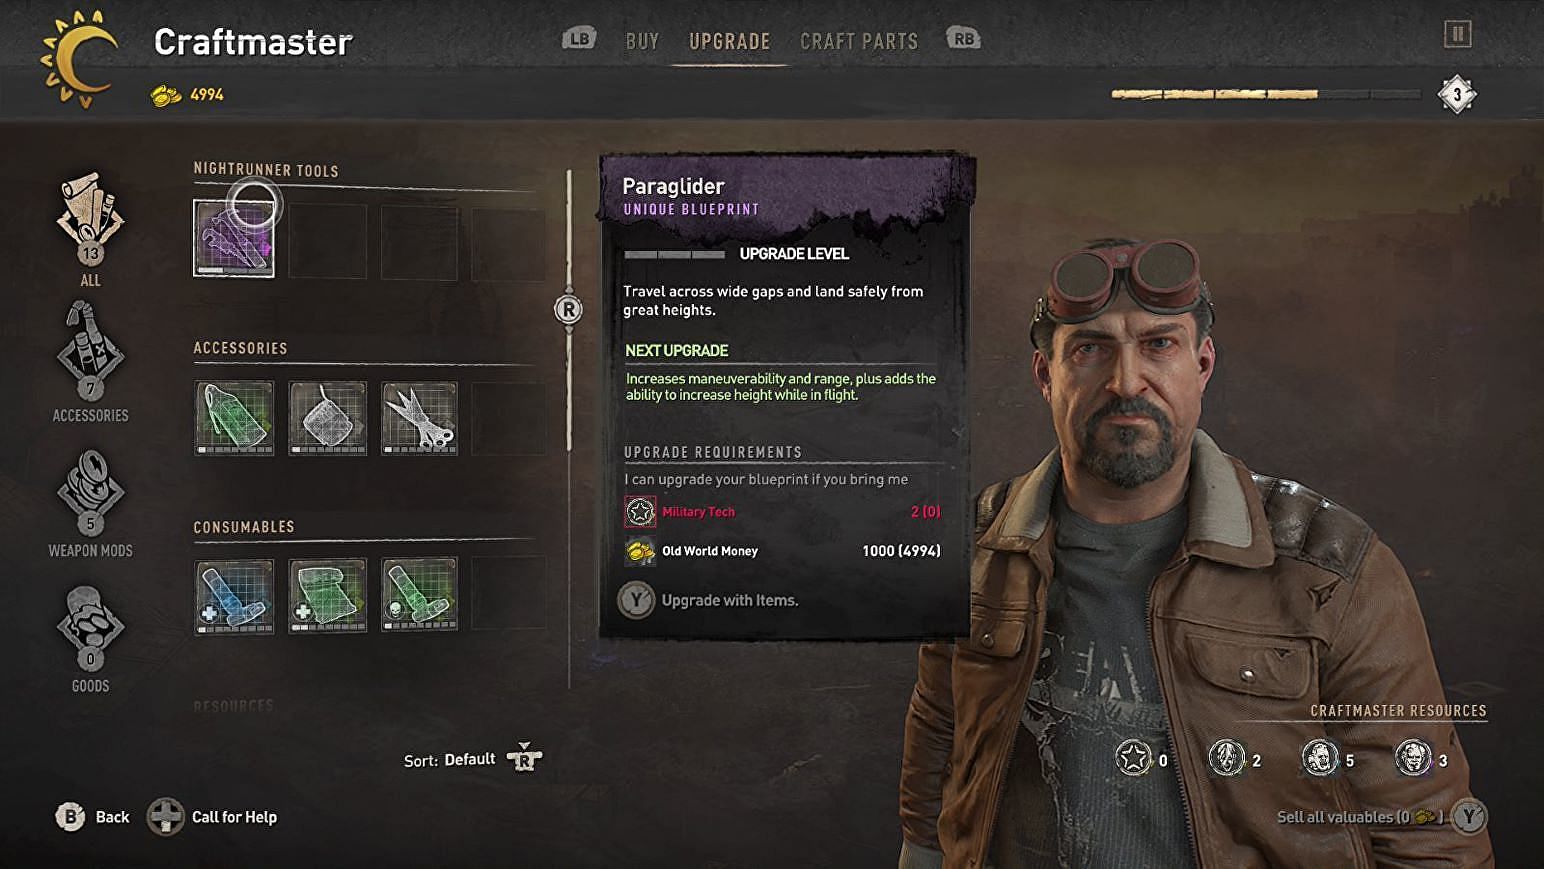 A Craftmaster will upgrade your paraglider for a price in Dying Light 2 (Image via Techland)